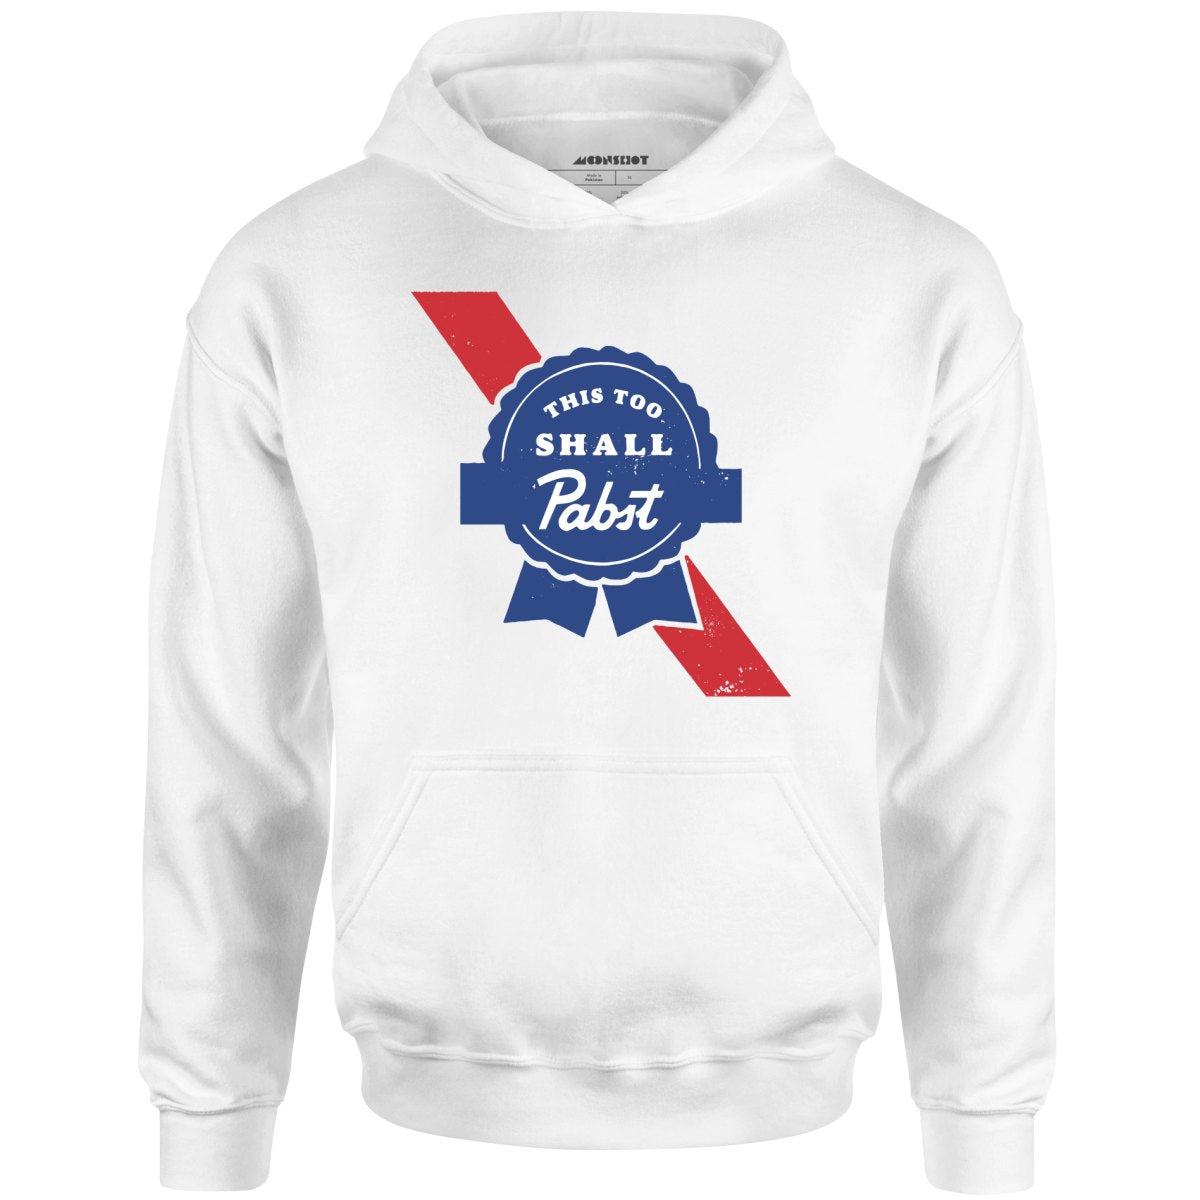 This Too Shall Pabst - Unisex Hoodie